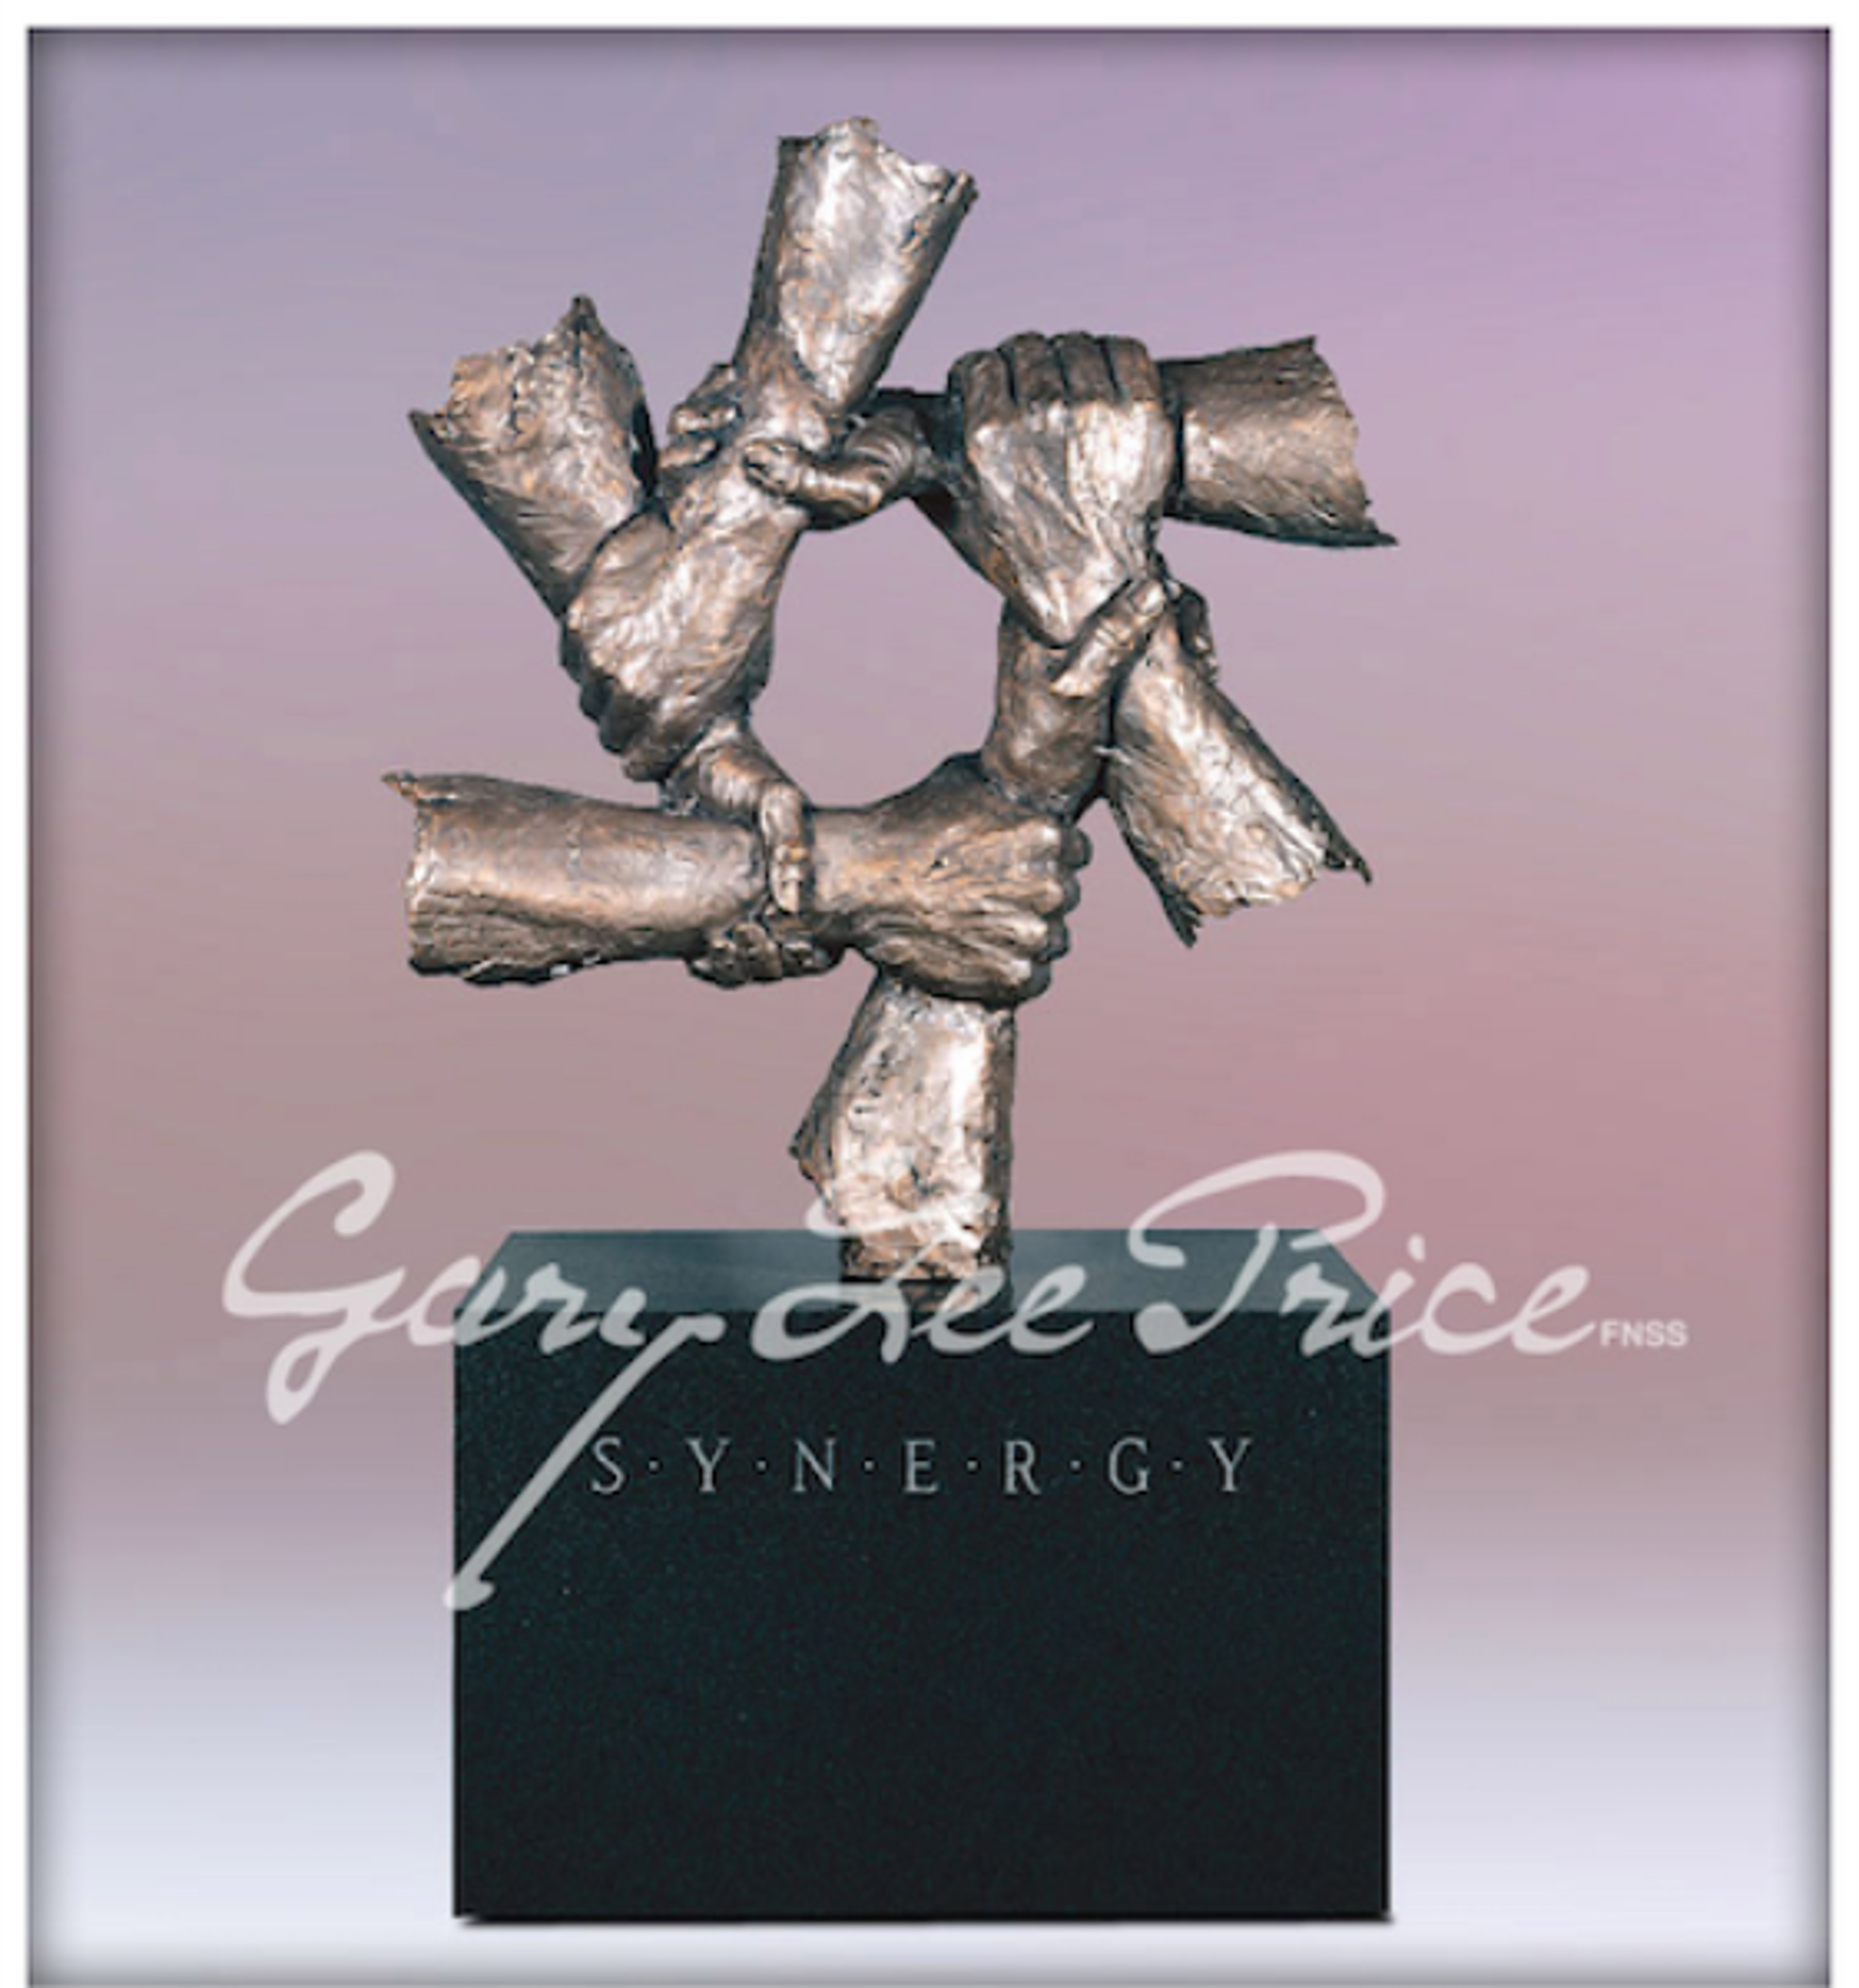 Synergy by Gary Lee Price